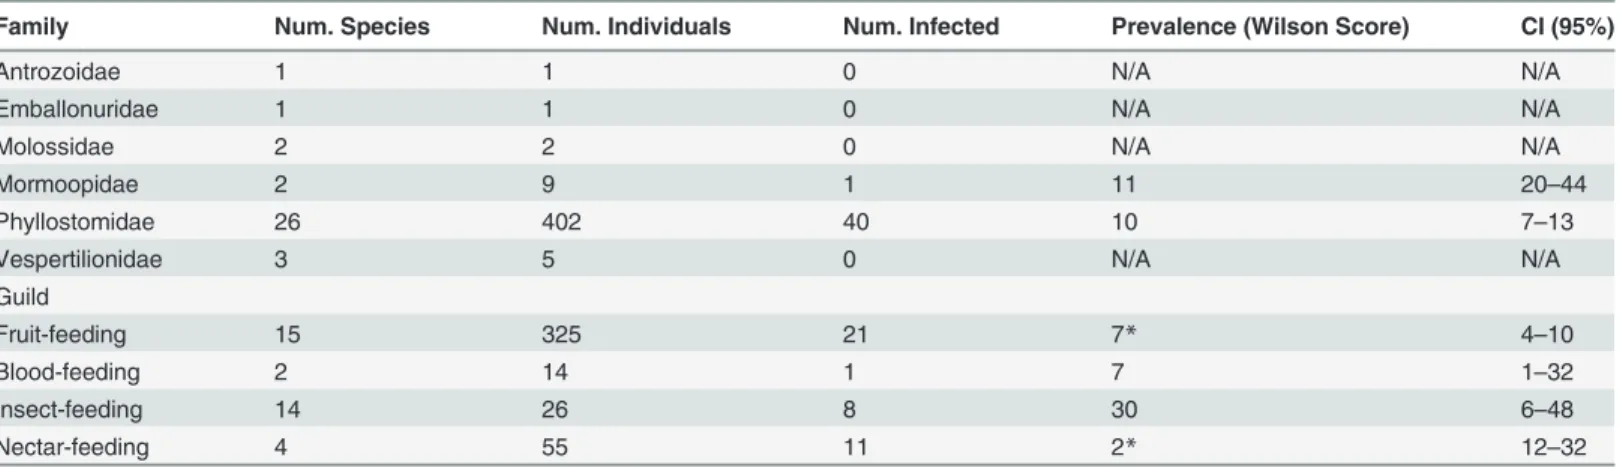 Table 1. 95% conﬁdence intervals for number of species infected in different taxonomical families and trophic guilds.